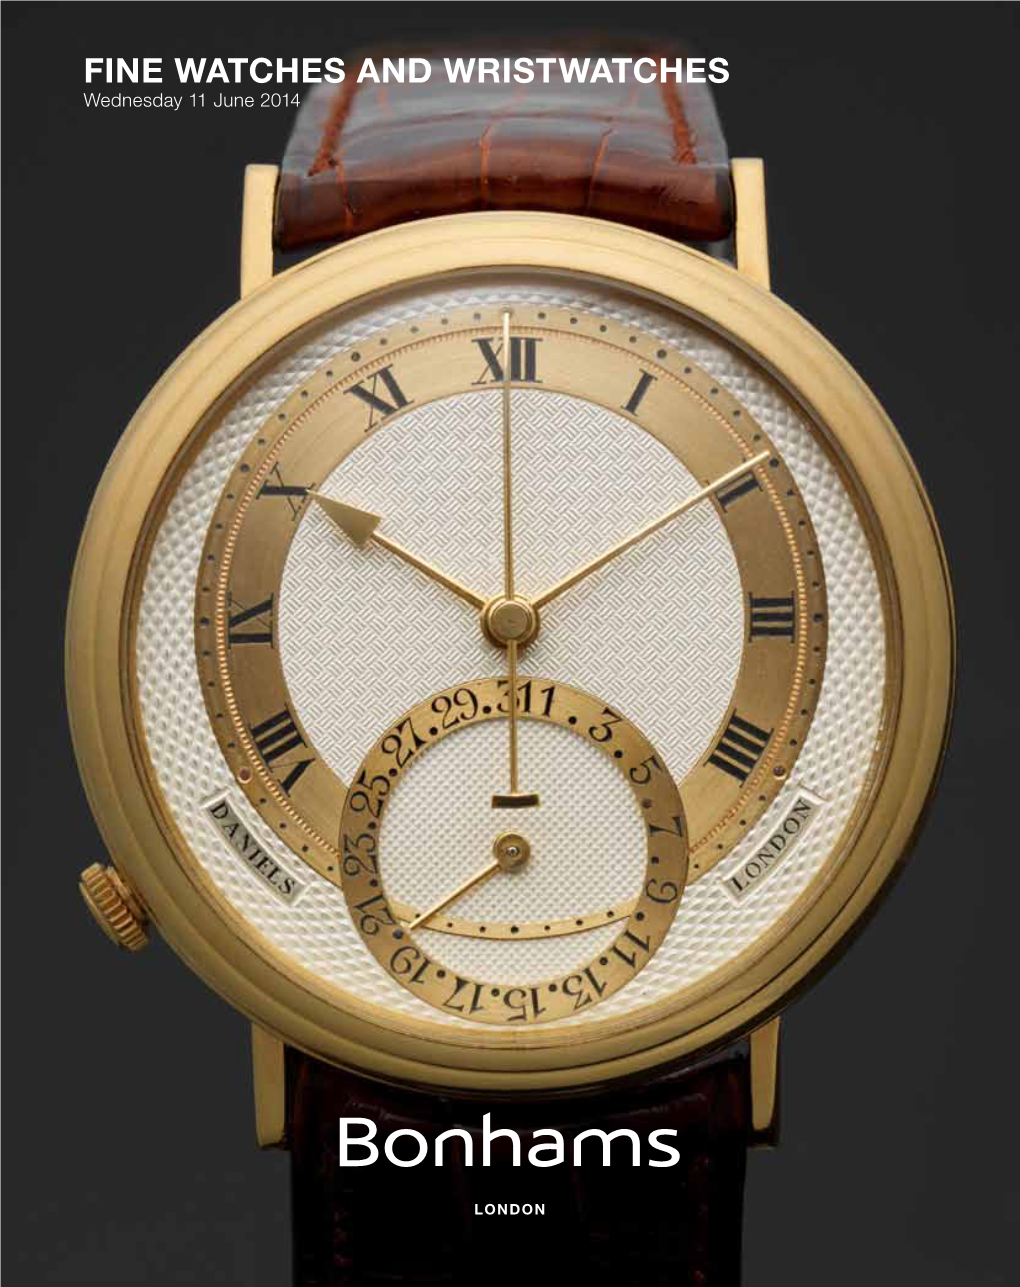 FINE WATCHES and WRISTWATCHES Wednesday 11 June 2014